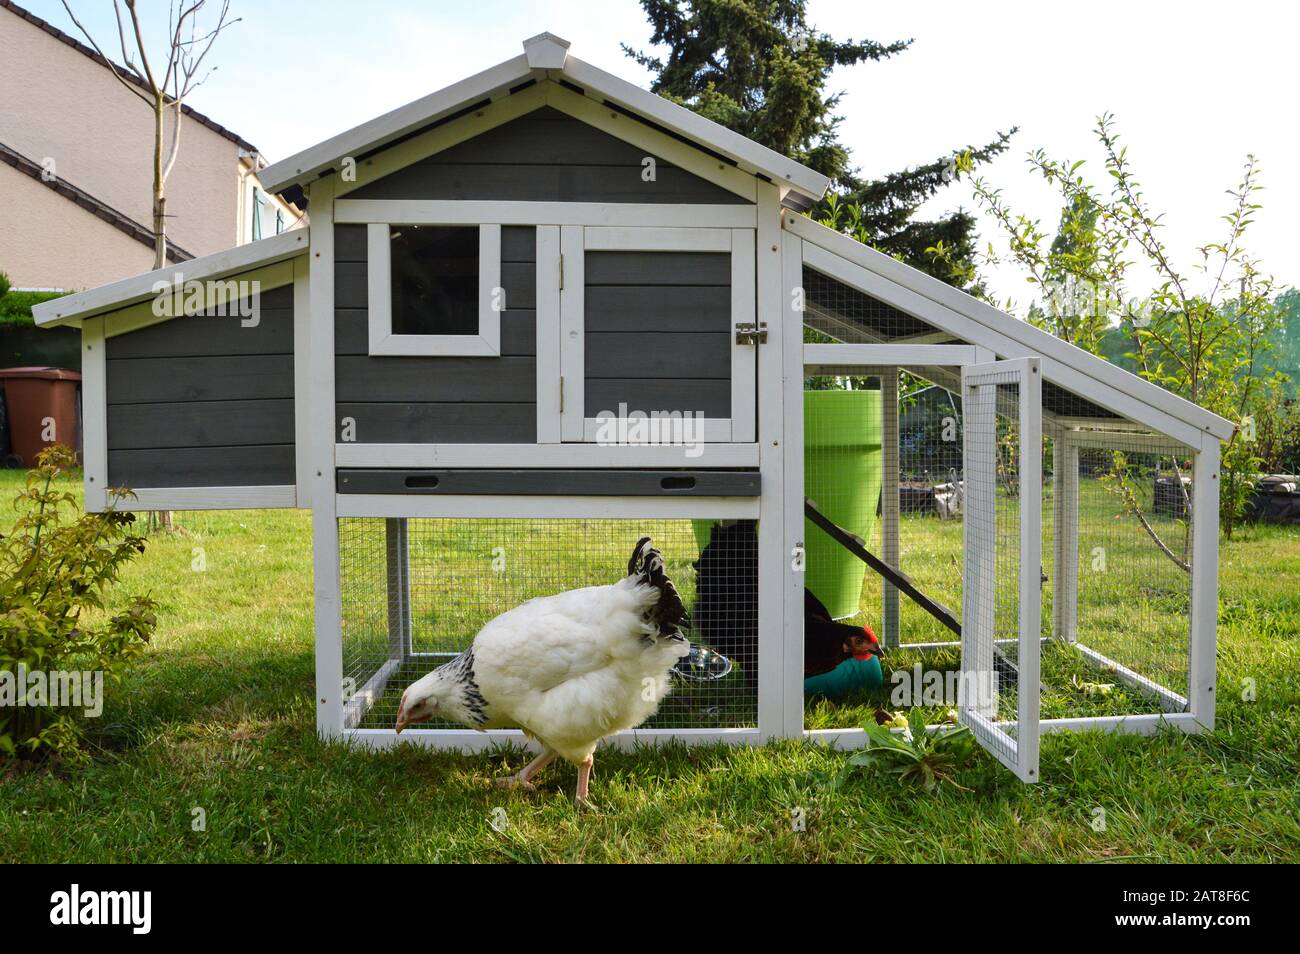 A hen house or chicken coop with hens Stock Photo